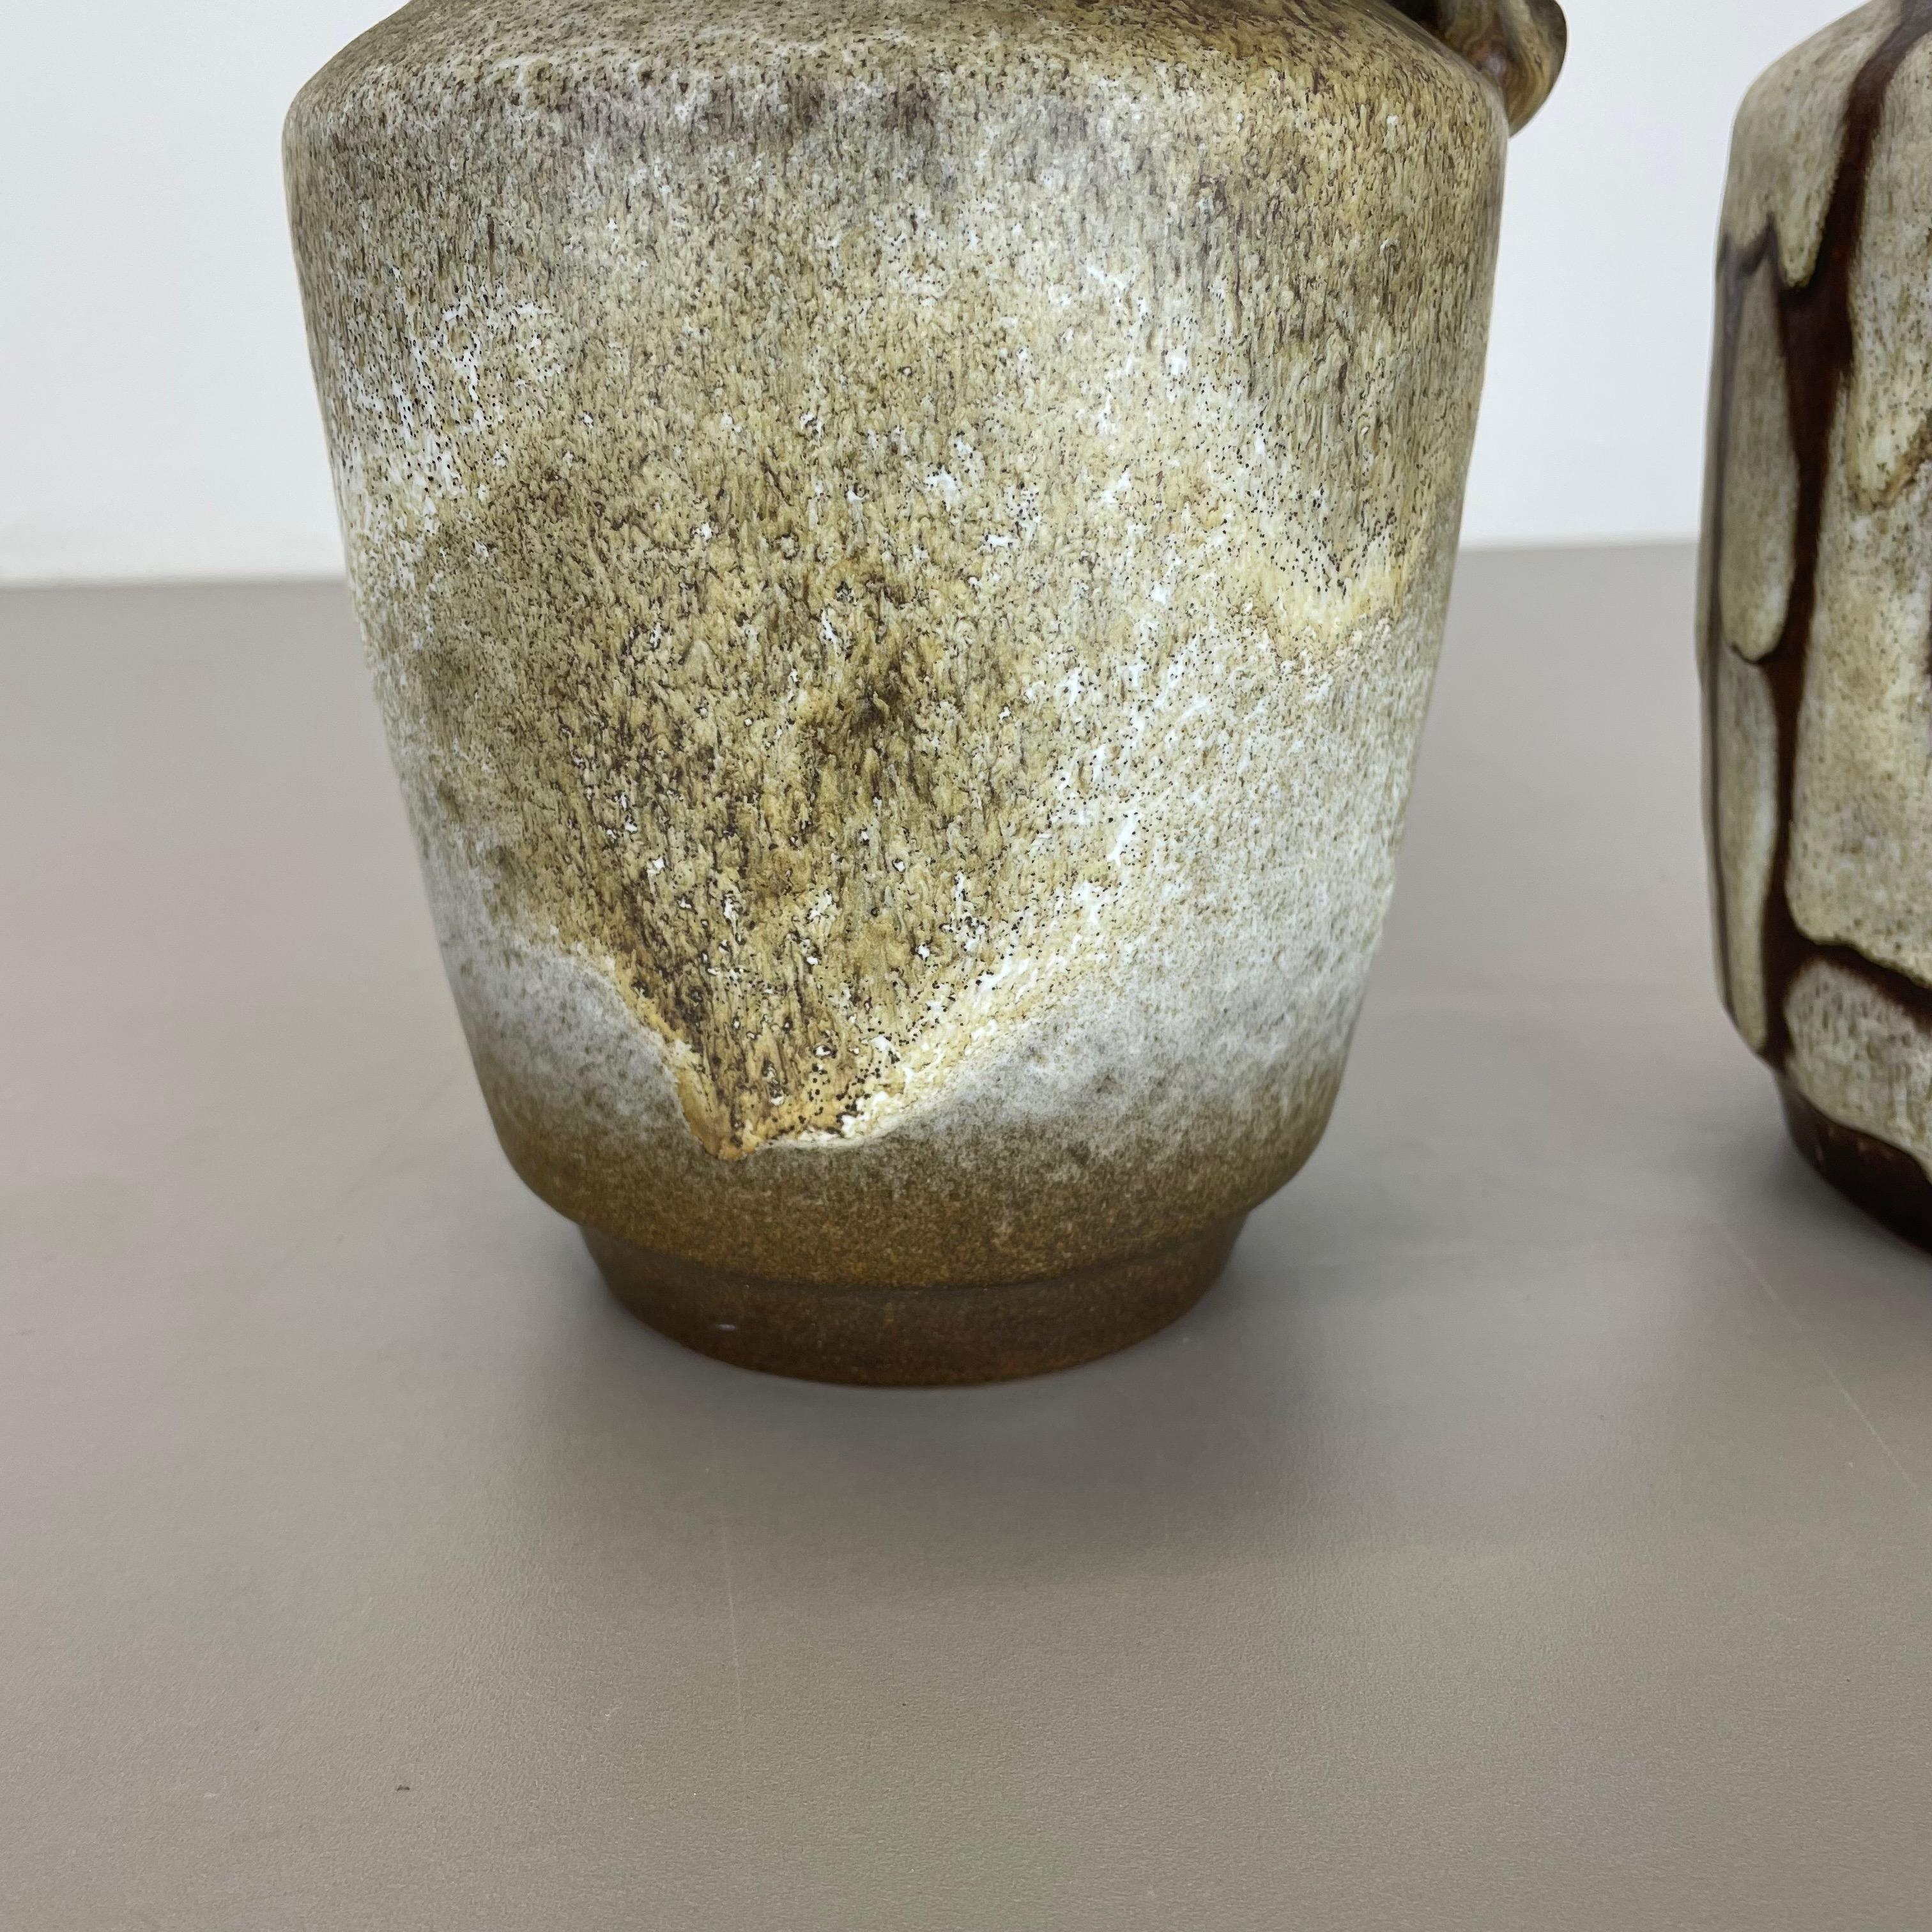 Set of 2 Fat Lava Pottery Vases Heinz Siery Carstens Atelier, Germany, 1970s For Sale 4